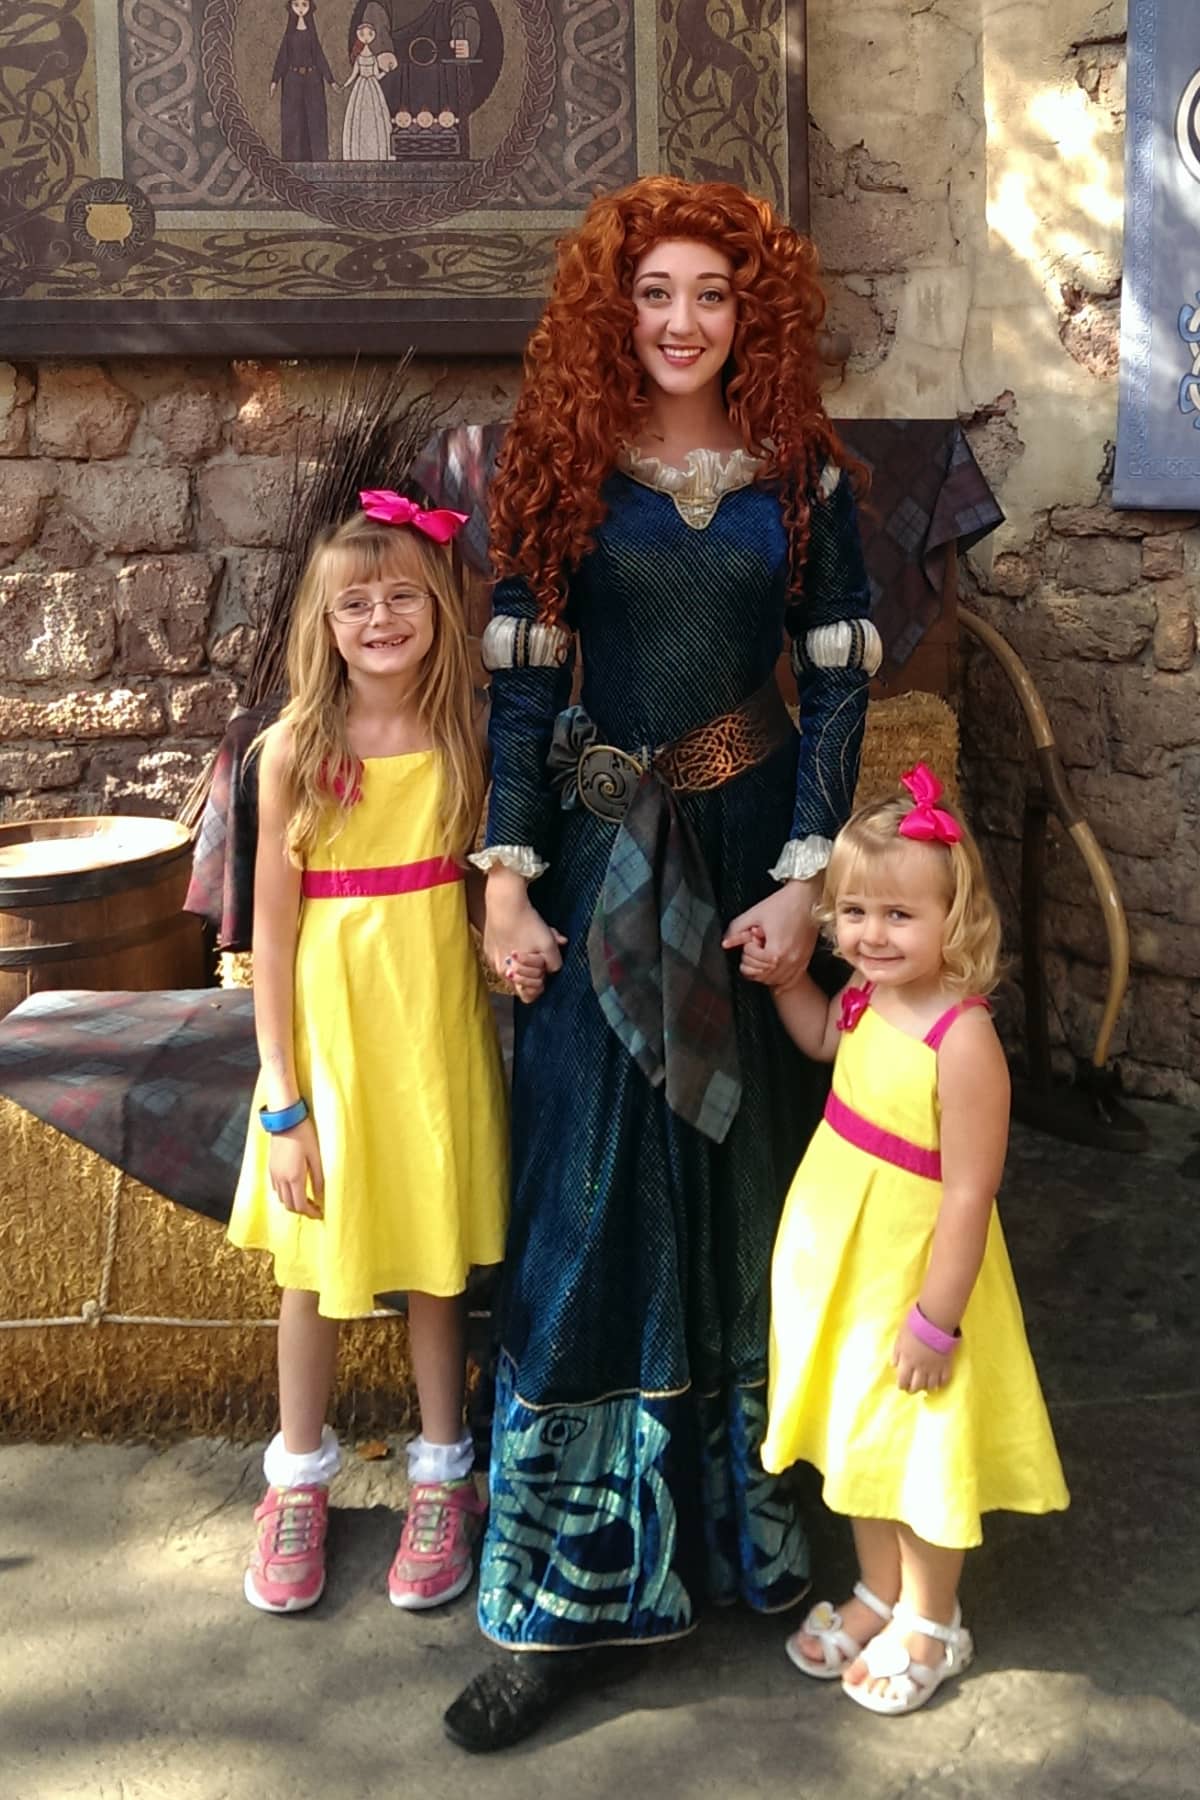 Two little girls taking a picture with Merida